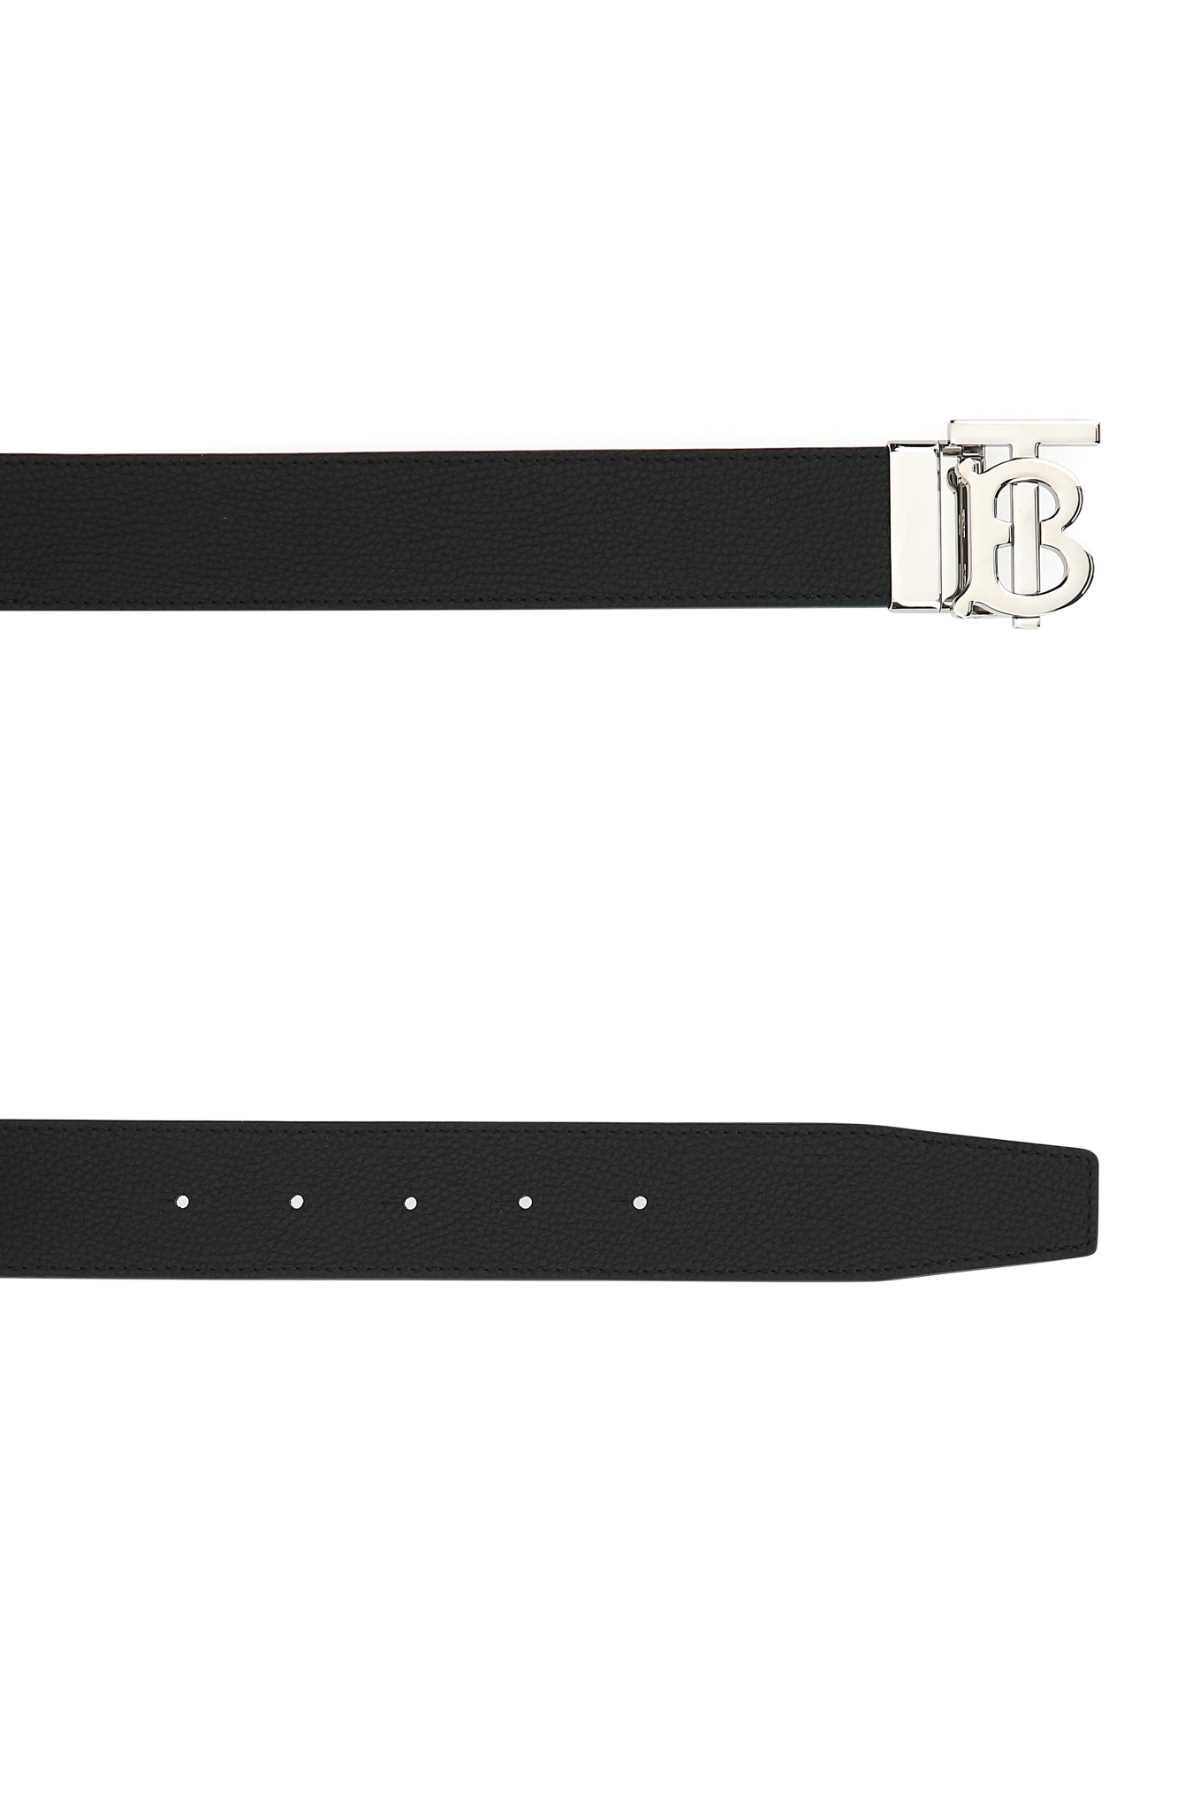 Burberry Black Leather Belt In A1189